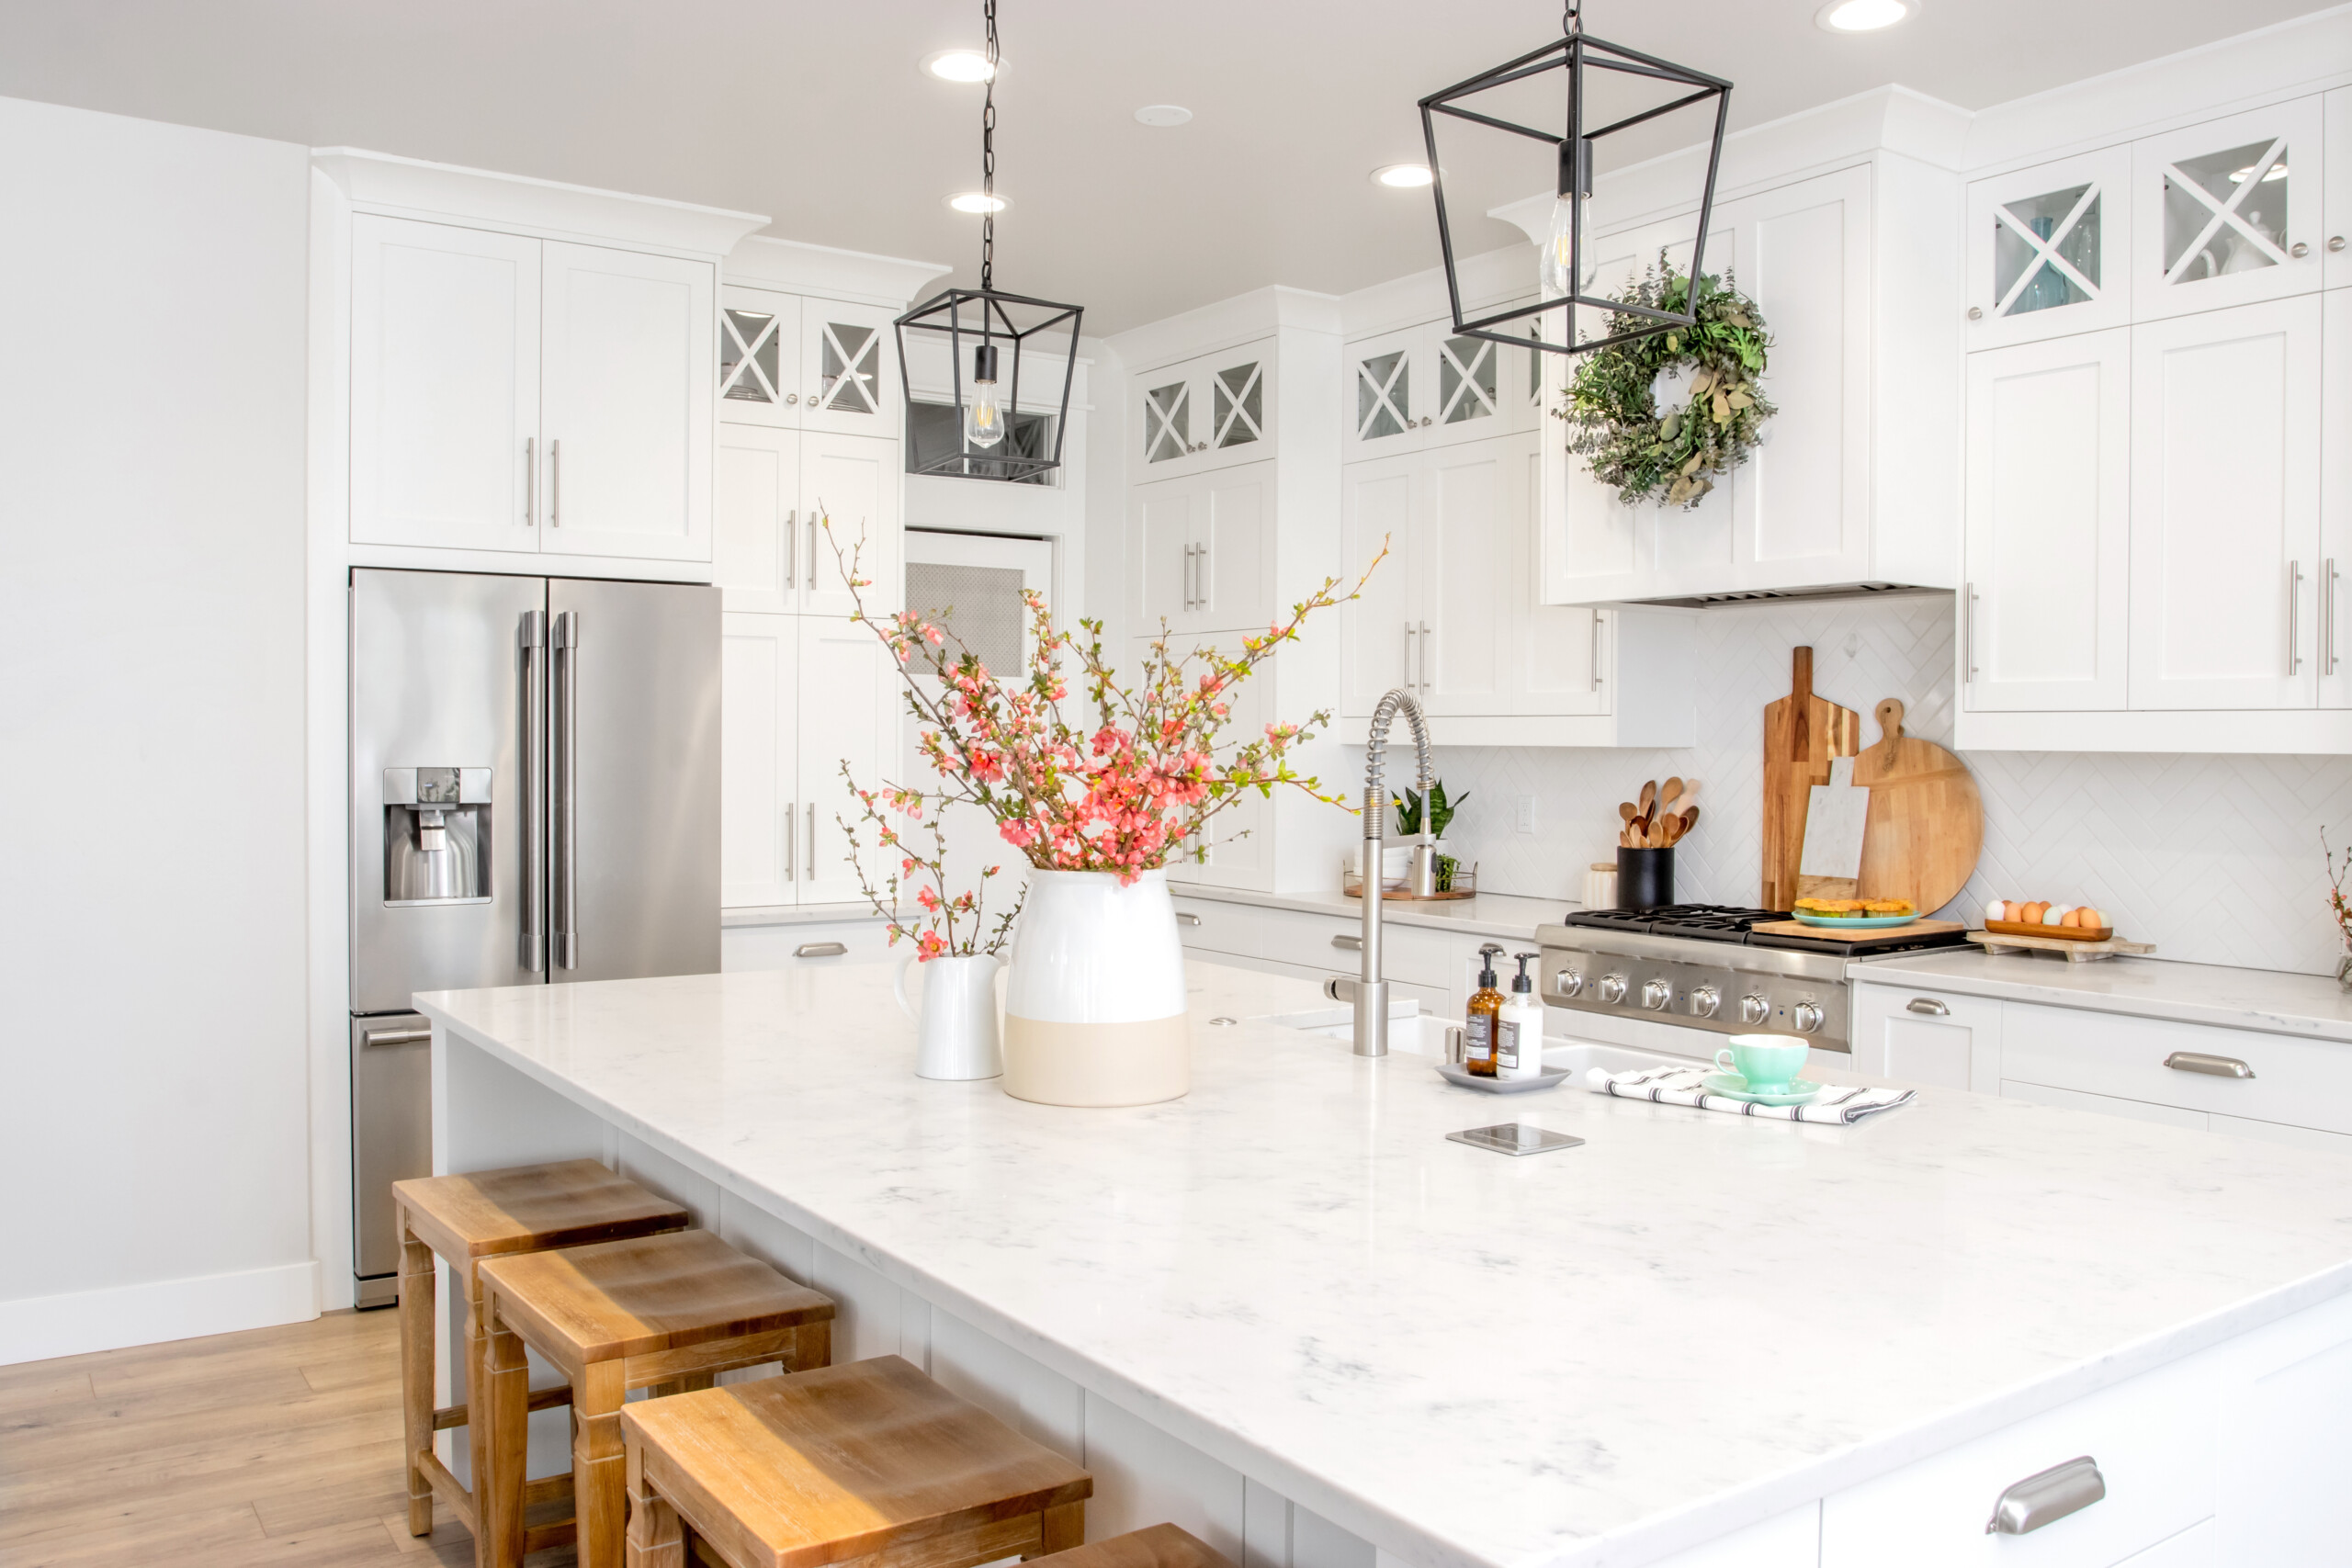 Kitchen Renovation Trends   Get Inspired By The Top 18   Décor Aid